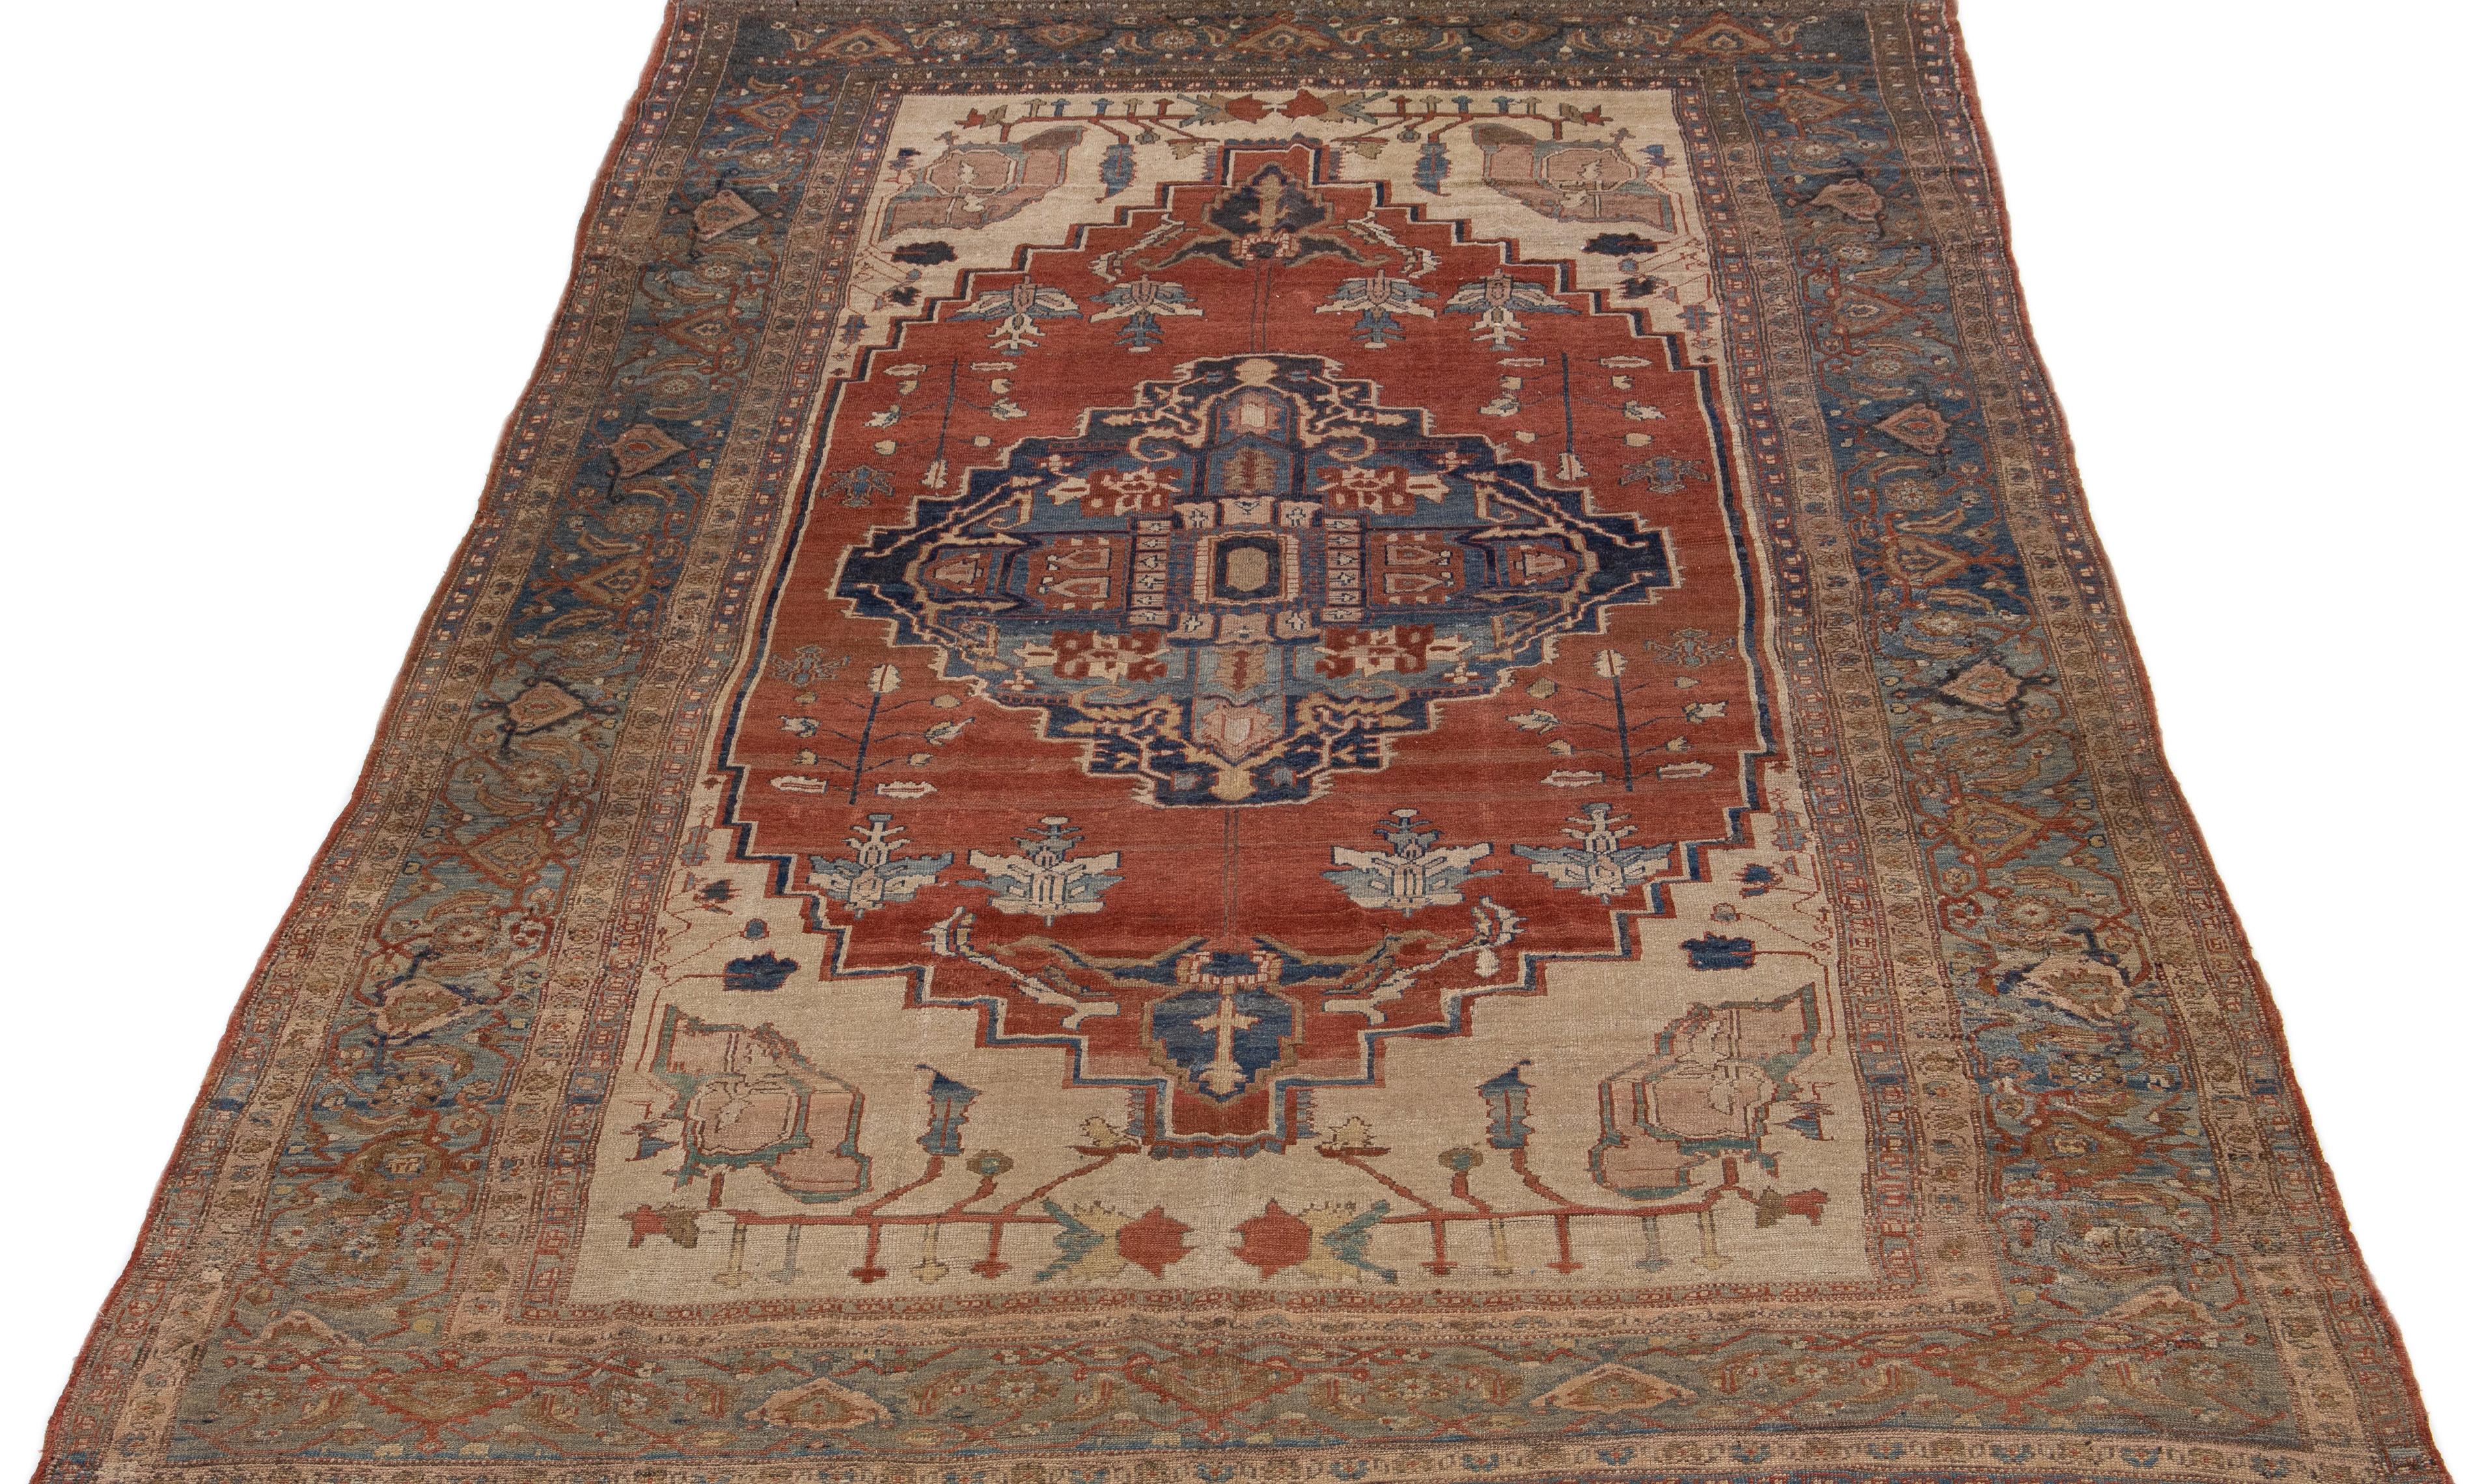 Beautiful vintage Bakshaish hand-knotted wool rug with a blue & rust color field. This Persian rug has the fame of blue and beige accents in an all-over geometric medallion design.

This rug measures 9'7